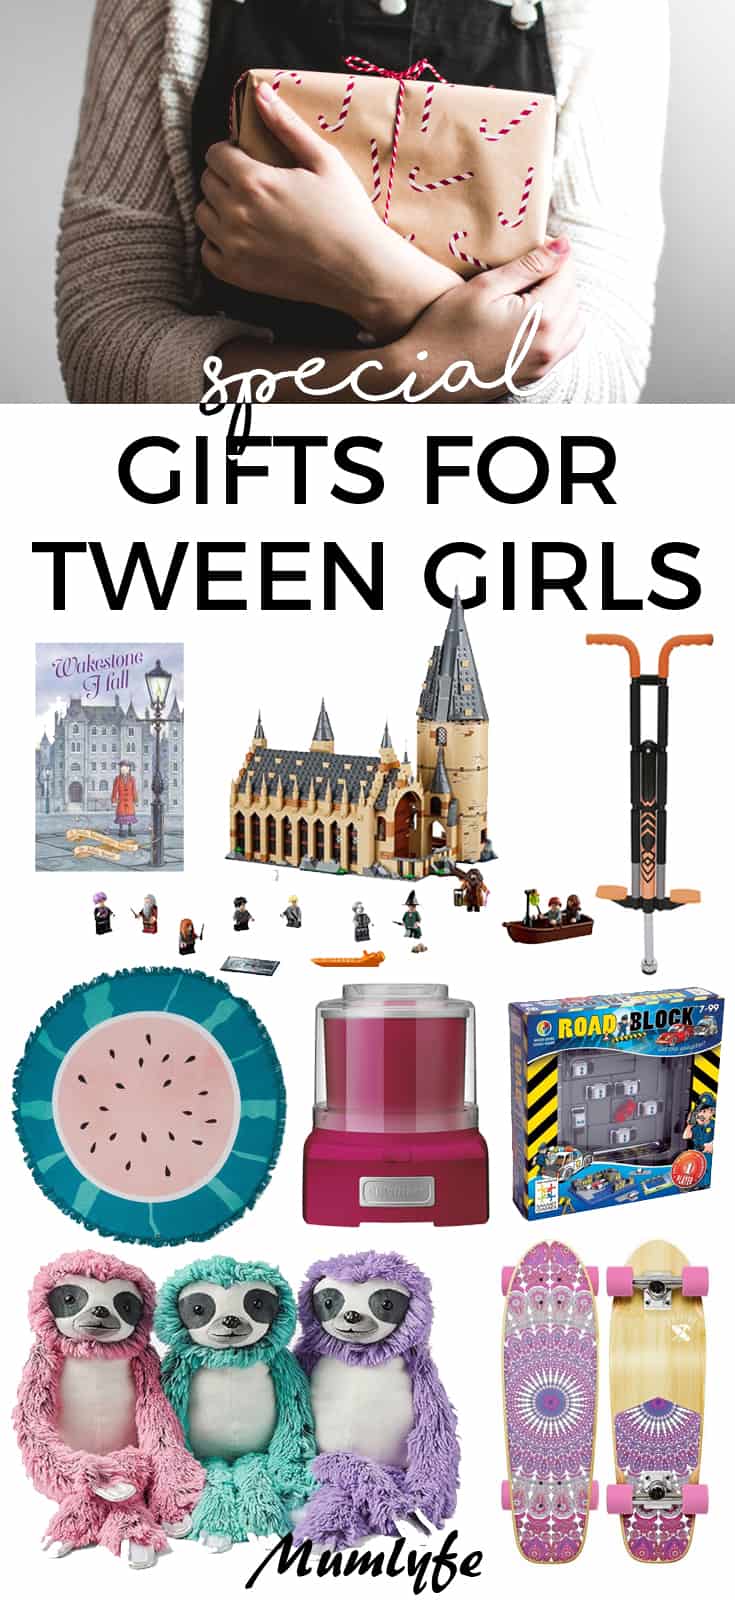 25 Christmas gift ideas for tween girls they'll really love (2023